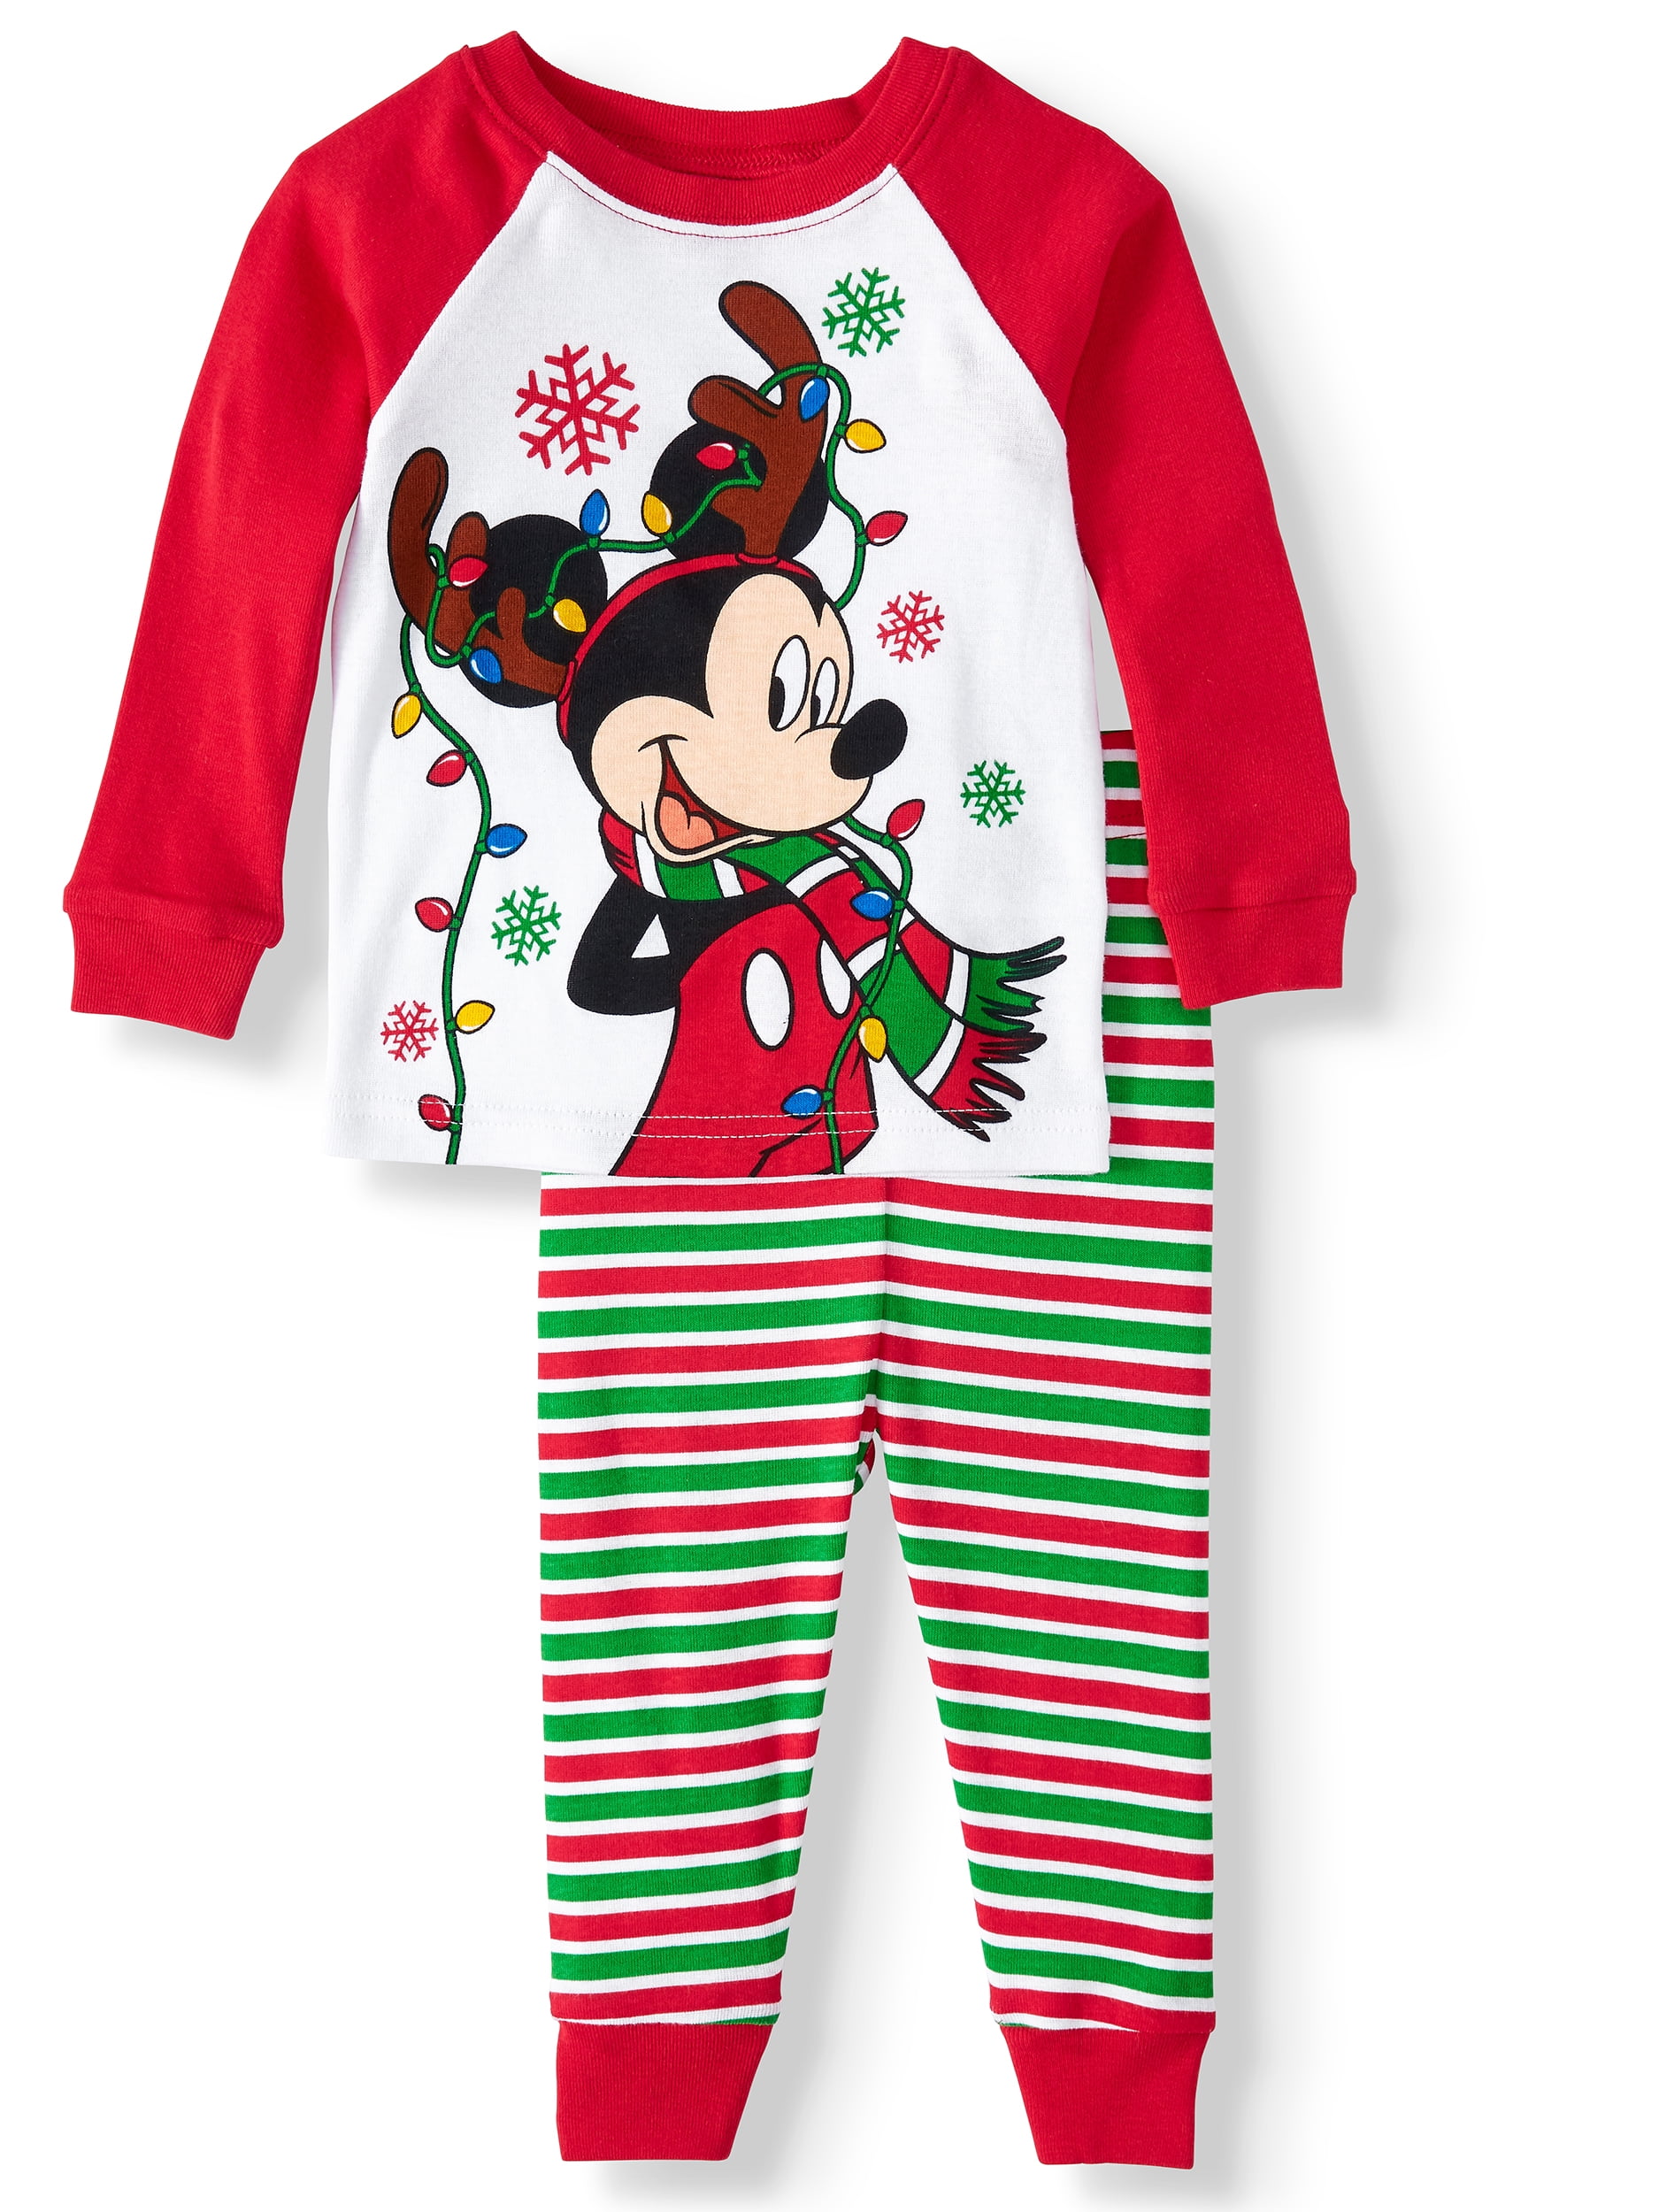 Official Mickey Mouse Boys Mickey Mouse Pyjamas Pjs Ages 18 Months to 5 Years 